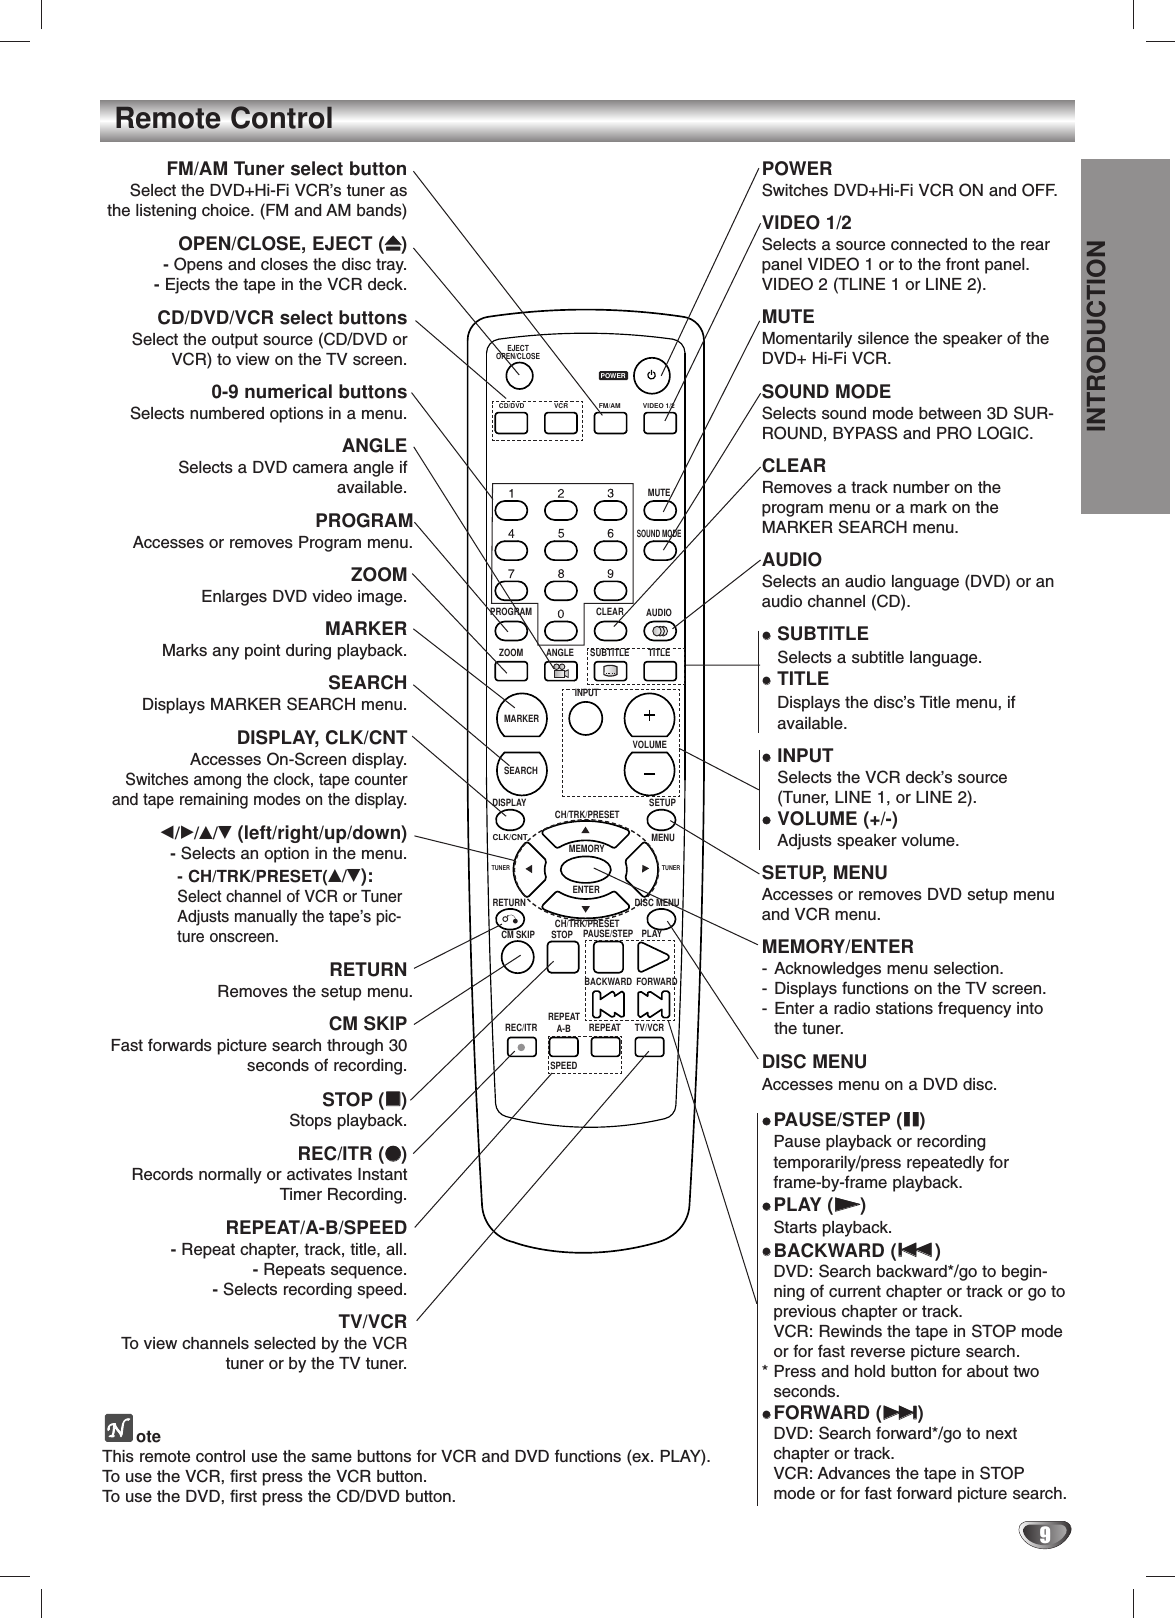 9INTRODUCTIONRemote ControlFM/AMOPEN/CLOSE      EJECT  MUTESOUND MODE AUDIO TITLE SUBTITLE    INPUT      ENTER      MEMORY      RETURN           CM SKIP        STOP      PAUSE/STEP      PLAY        BACKWARD        FORWARD      REC/ITR      REPEAT          A-B       SPEED      REPEAT      TV/VCR      DISC MENU     DISPLAY     CLK/CNT     CH/TRK/PRESET     CH/TRK/PRESET       SETUP        MENU        TUNER        TUNER      VOLUME     MARKER     SEARCH  ANGLE  ZOOMPROGRAM    CLEARCD/DVD    VCR VIDEO 1/2POWERFM/AM Tuner select buttonSelect the DVD+Hi-Fi VCR’s tuner asthe listening choice. (FM and AM bands)OPEN/CLOSE, EJECT (ZZ)- Opens and closes the disc tray.- Ejects the tape in the VCR deck.CD/DVD/VCR select buttonsSelect the output source (CD/DVD orVCR) to view on the TV screen. 0-9 numerical buttonsSelects numbered options in a menu.ANGLESelects a DVD camera angle if available.PROGRAMAccesses or removes Program menu.ZOOMEnlarges DVD video image.MARKER Marks any point during playback.SEARCH Displays MARKER SEARCH menu.DISPLAY, CLK/CNTAccesses On-Screen display.Switches among the clock, tape counterand tape remaining modes on the display.b/B/v/V(left/right/up/down)- Selects an option in the menu.- CH/TRK/PRESET(v/V):Select channel of VCR or TunerAdjusts manually the tape’s pic-ture onscreen. RETURNRemoves the setup menu.CM SKIPFast forwards picture search through 30seconds of recording.STOP (xx)Stops playback.REC/ITR (zz)Records normally or activates InstantTimer Recording.REPEAT/A-B/SPEED-Repeat chapter, track, title, all.- Repeats sequence.- Selects recording speed.TV/VCR To view channels selected by the VCRtuner or by the TV tuner.POWERSwitches DVD+Hi-Fi VCR ON and OFF.VIDEO 1/2Selects a source connected to the rearpanel VIDEO 1 or to the front panel.VIDEO 2 (TLINE 1 or LINE 2).MUTEMomentarily silence the speaker of theDVD+ Hi-Fi VCR.SOUND MODESelects sound mode between 3D SUR-ROUND, BYPASS and PRO LOGIC.CLEARRemoves a track number on the program menu or a mark on the MARKER SEARCH menu.AUDIO Selects an audio language (DVD) or anaudio channel (CD). SUBTITLE Selects a subtitle language.TITLEDisplays the disc’s Title menu, if available.INPUT Selects the VCR deck’s source (Tuner, LINE 1, or LINE 2).VOLUME (+/-) Adjusts speaker volume.SETUP, MENUAccesses or removes DVD setup menuand VCR menu.MEMORY/ENTER- Acknowledges menu selection.- Displays functions on the TV screen.- Enter a radio stations frequency into the tuner.DISC MENUAccesses menu on a DVD disc.PAUSE/STEP (XX) Pause playback or recording  temporarily/press repeatedly for frame-by-frame playback.PLAY (NN)Starts playback.BACKWARD (..)DVD: Search backward*/go to begin-ning of current chapter or track or go to previous chapter or track.VCR: Rewinds the tape in STOP mode or for fast reverse picture search.* Press and hold button for about two seconds.FORWARD (&gt;&gt;)DVD: Search forward*/go to next chapter or track.VCR: Advances the tape in STOPmode or for fast forward picture search.oteThis remote control use the same buttons for VCR and DVD functions (ex. PLAY).To use the VCR, first press the VCR button.To use the DVD, first press the CD/DVD button.